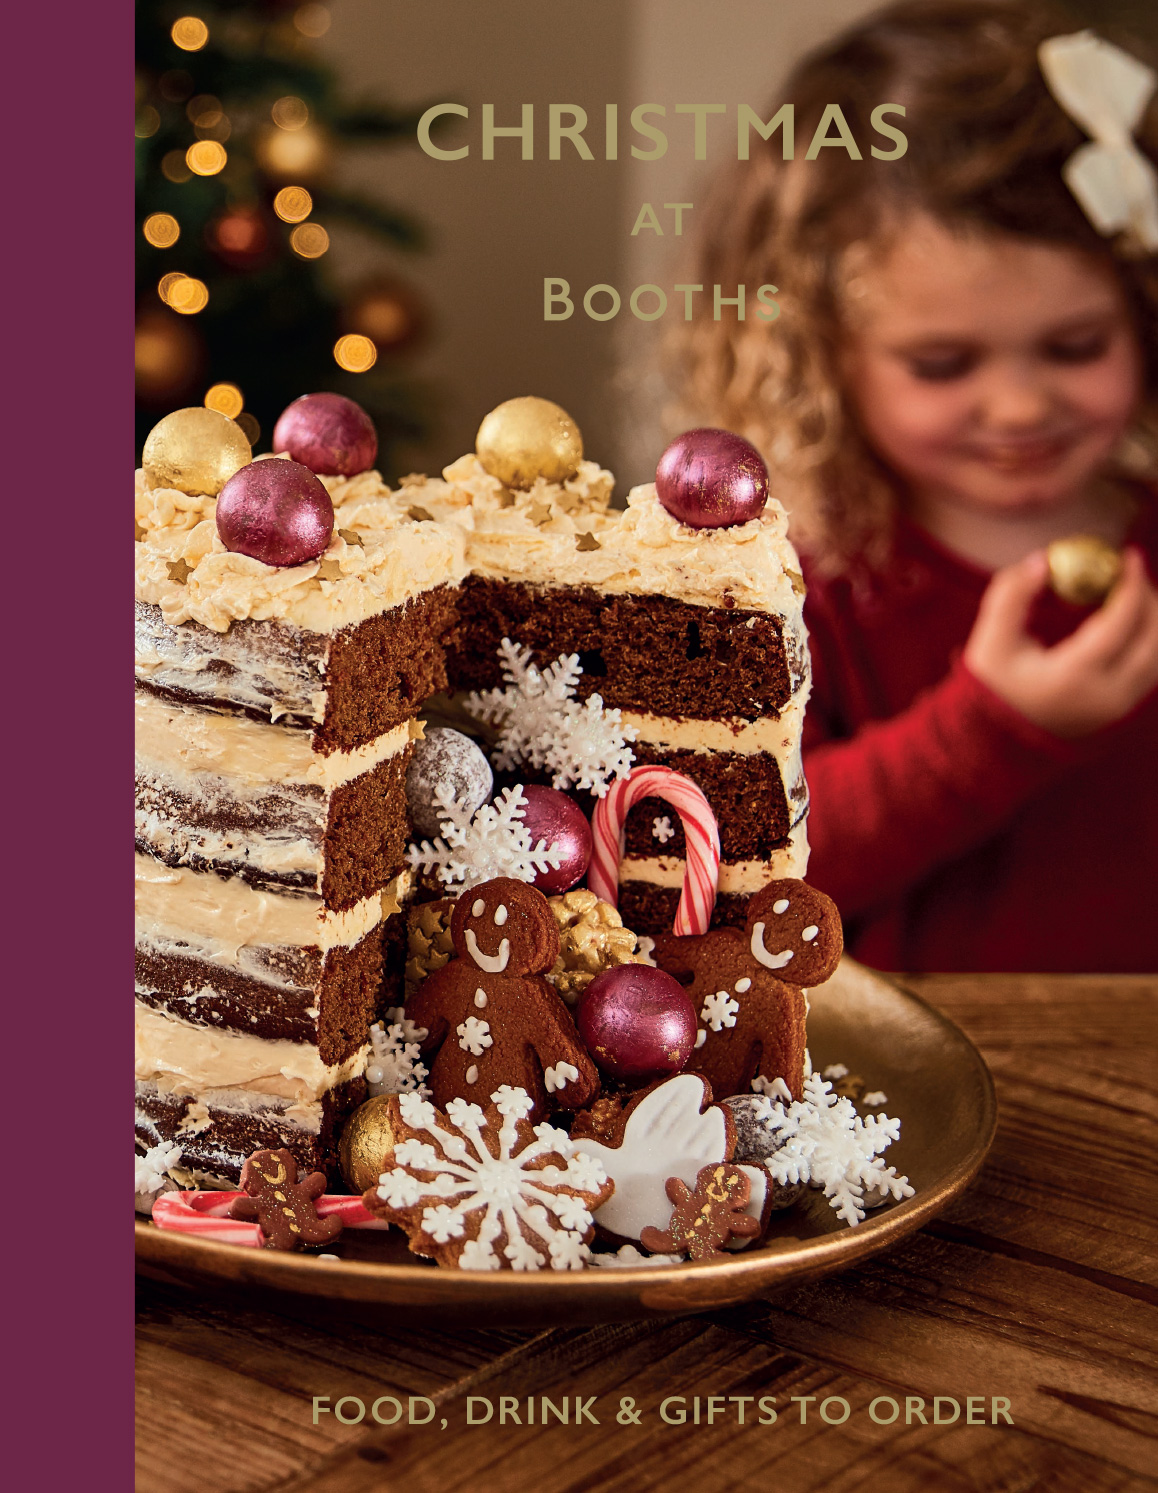 Booths Christmas Book Cover 2018